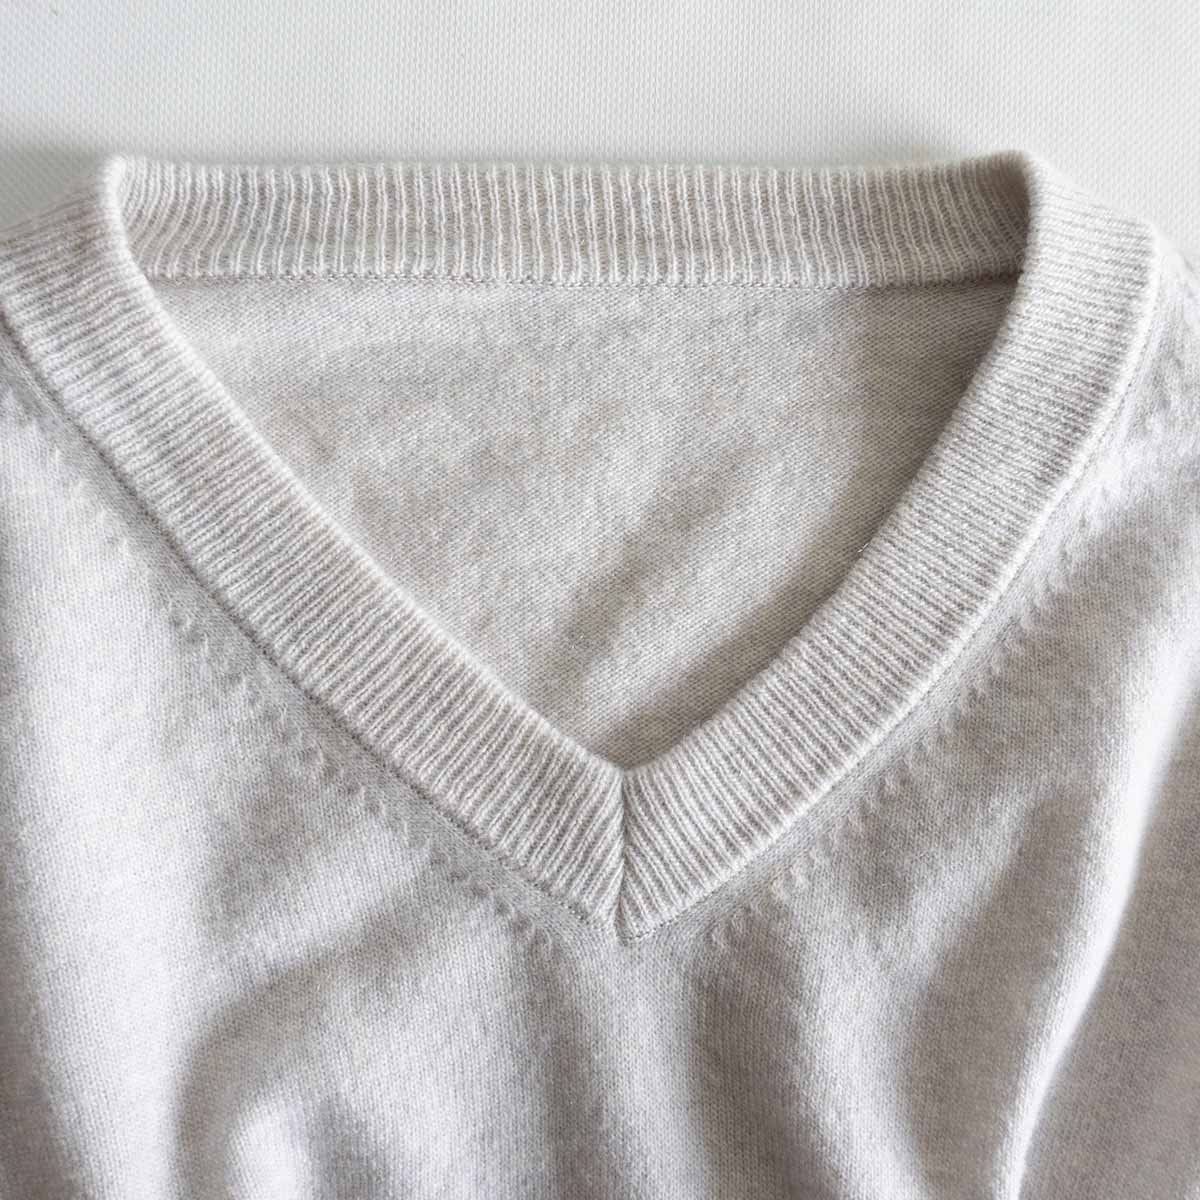 19AW】ARTS&SCIENCE 【wool/cashmere sweater】ウール カシミヤ ニット 